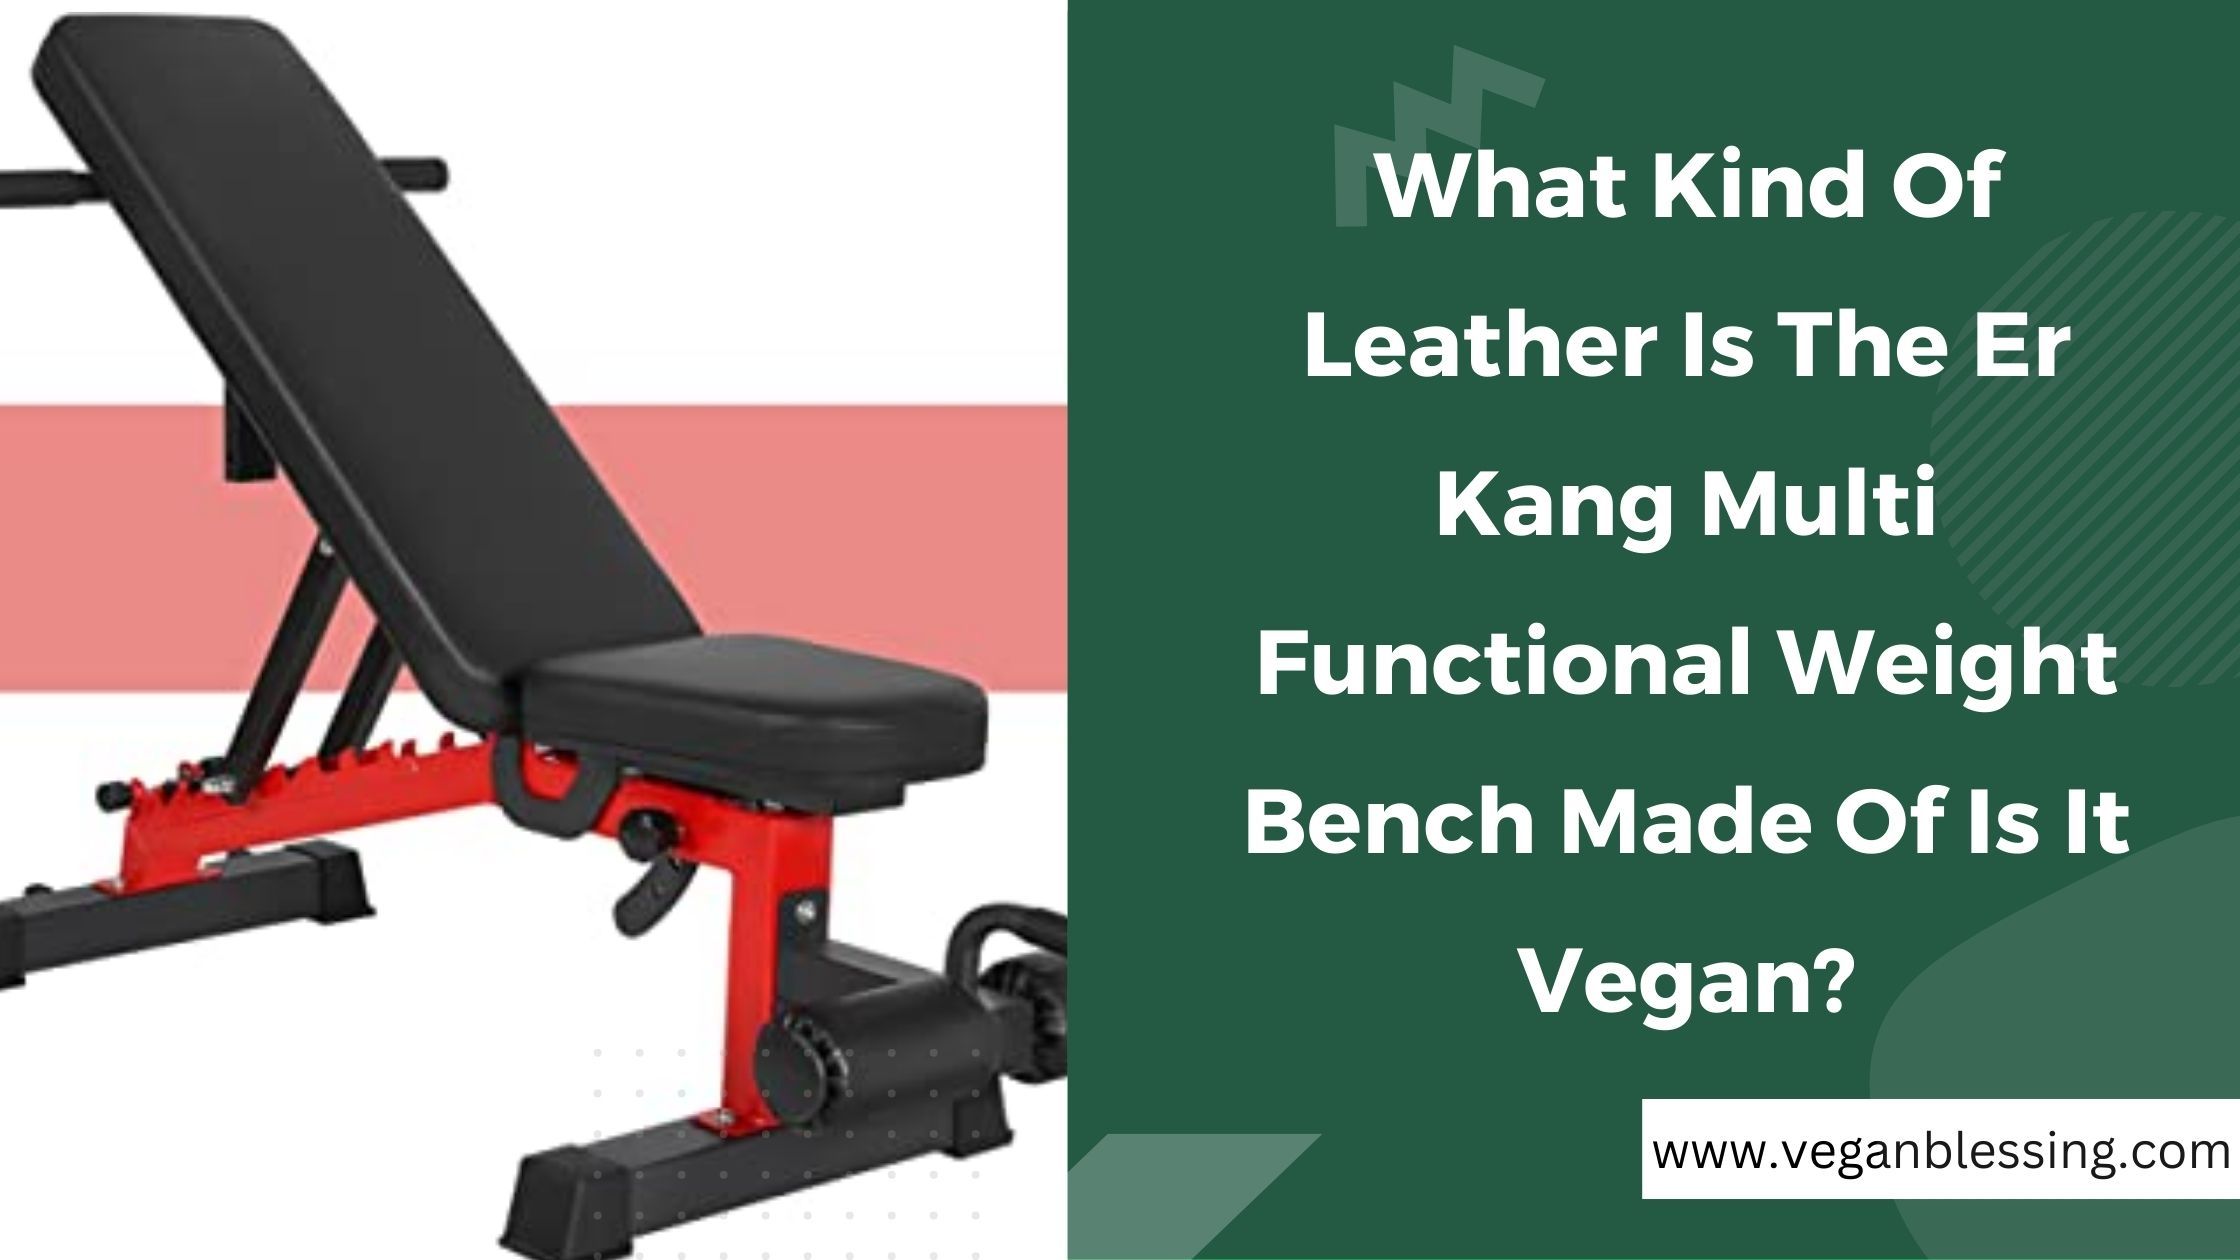 What Kind Of Leather Is The Er Kang Multi Functional Weight Bench Made Of Is It Vegan? What Kind Of Leather Is The Er Kang Multi Functional Weight Bench Made Of Is It Vegan